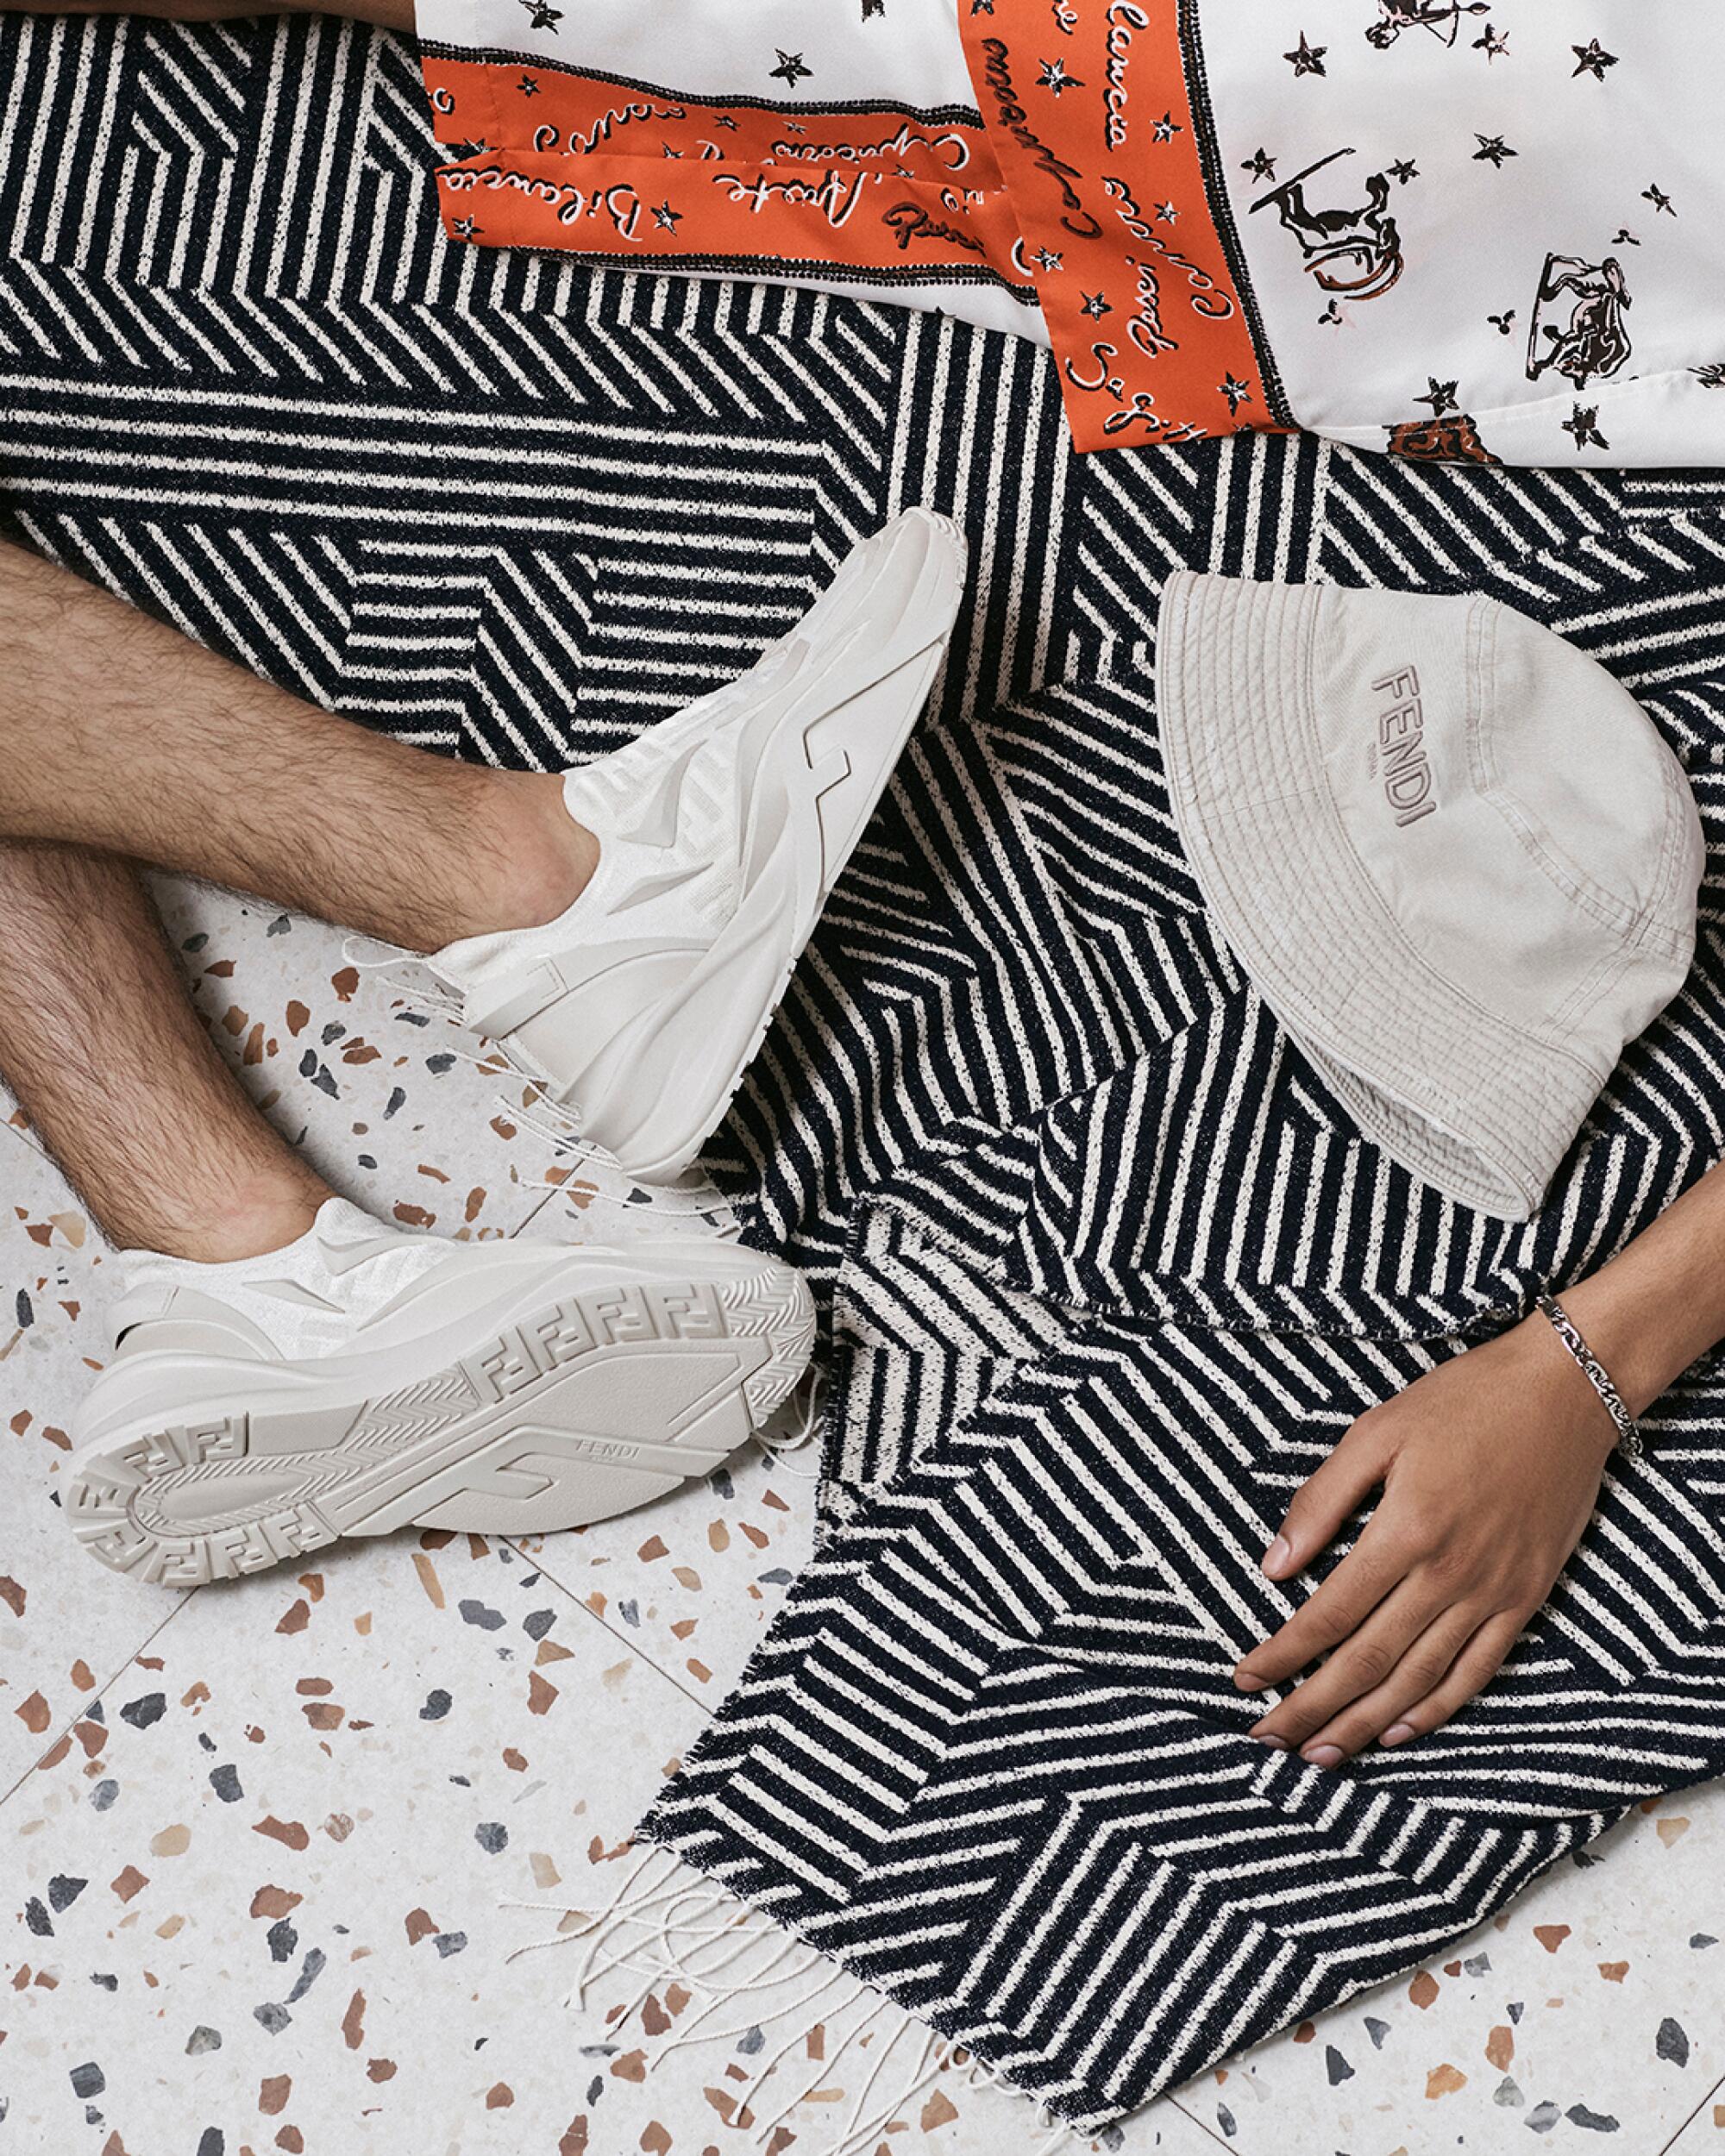 Feet in white sneakers rest next to a black-and-white striped outfit and a white bucket hat